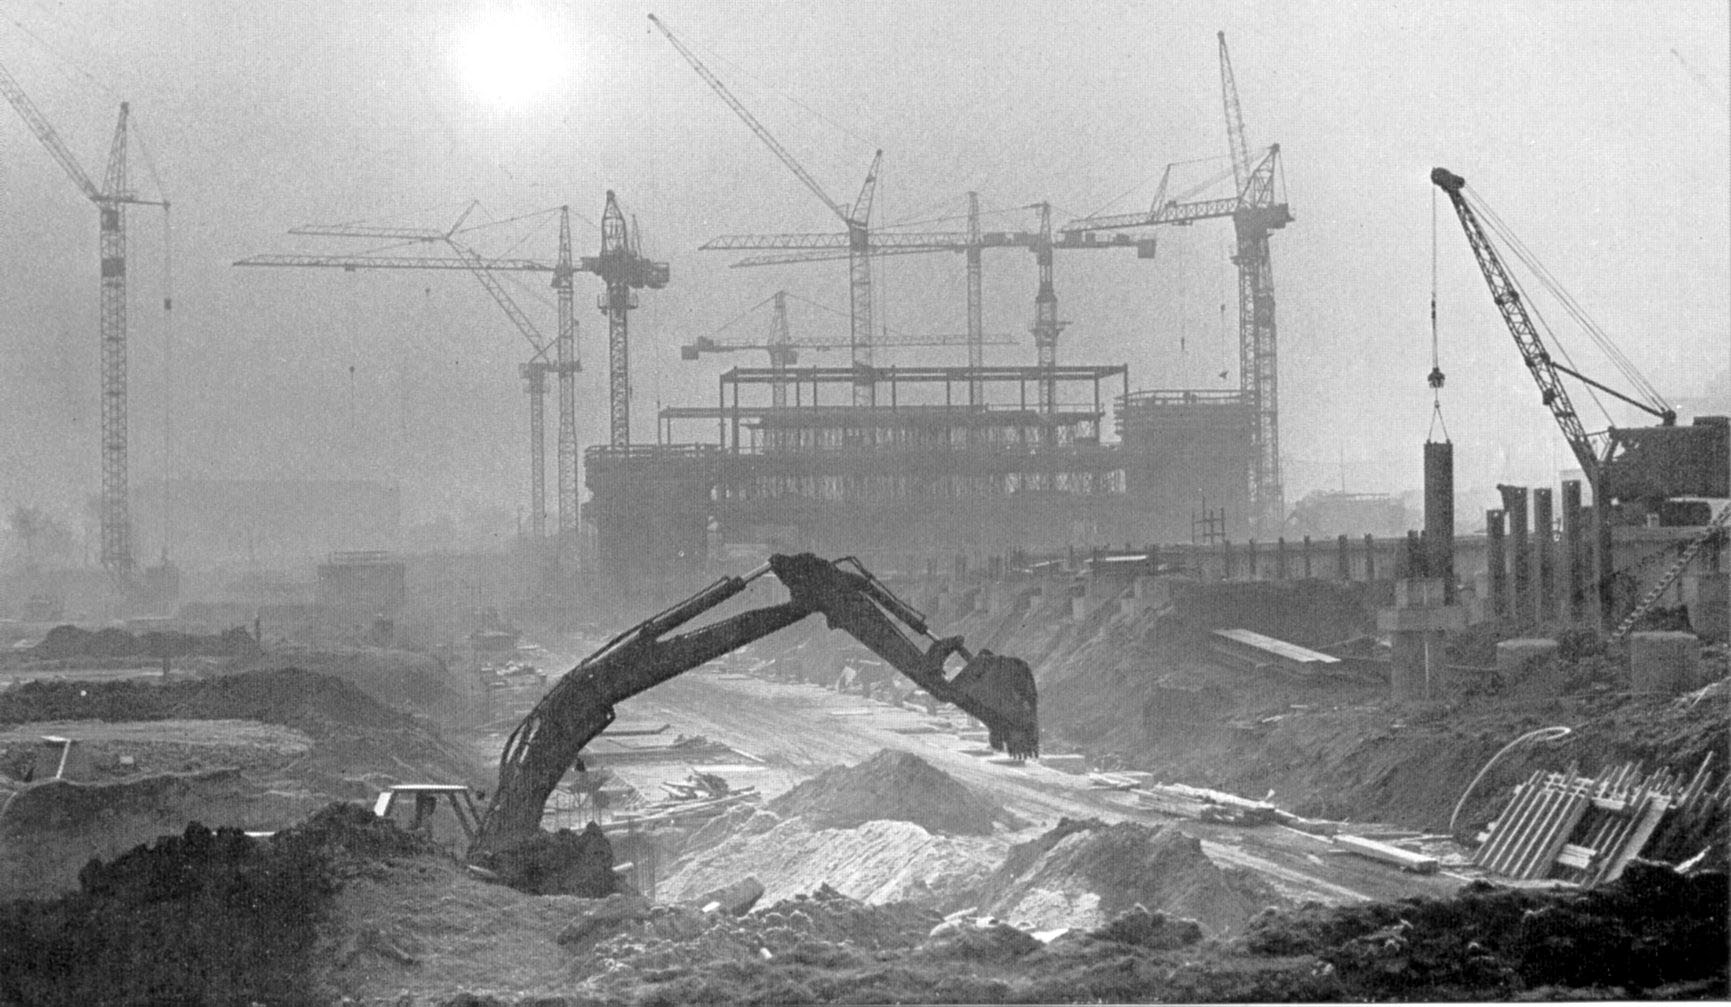 Photo: Excavator in front of university construction site with construction cranes, 1st half in 1970s